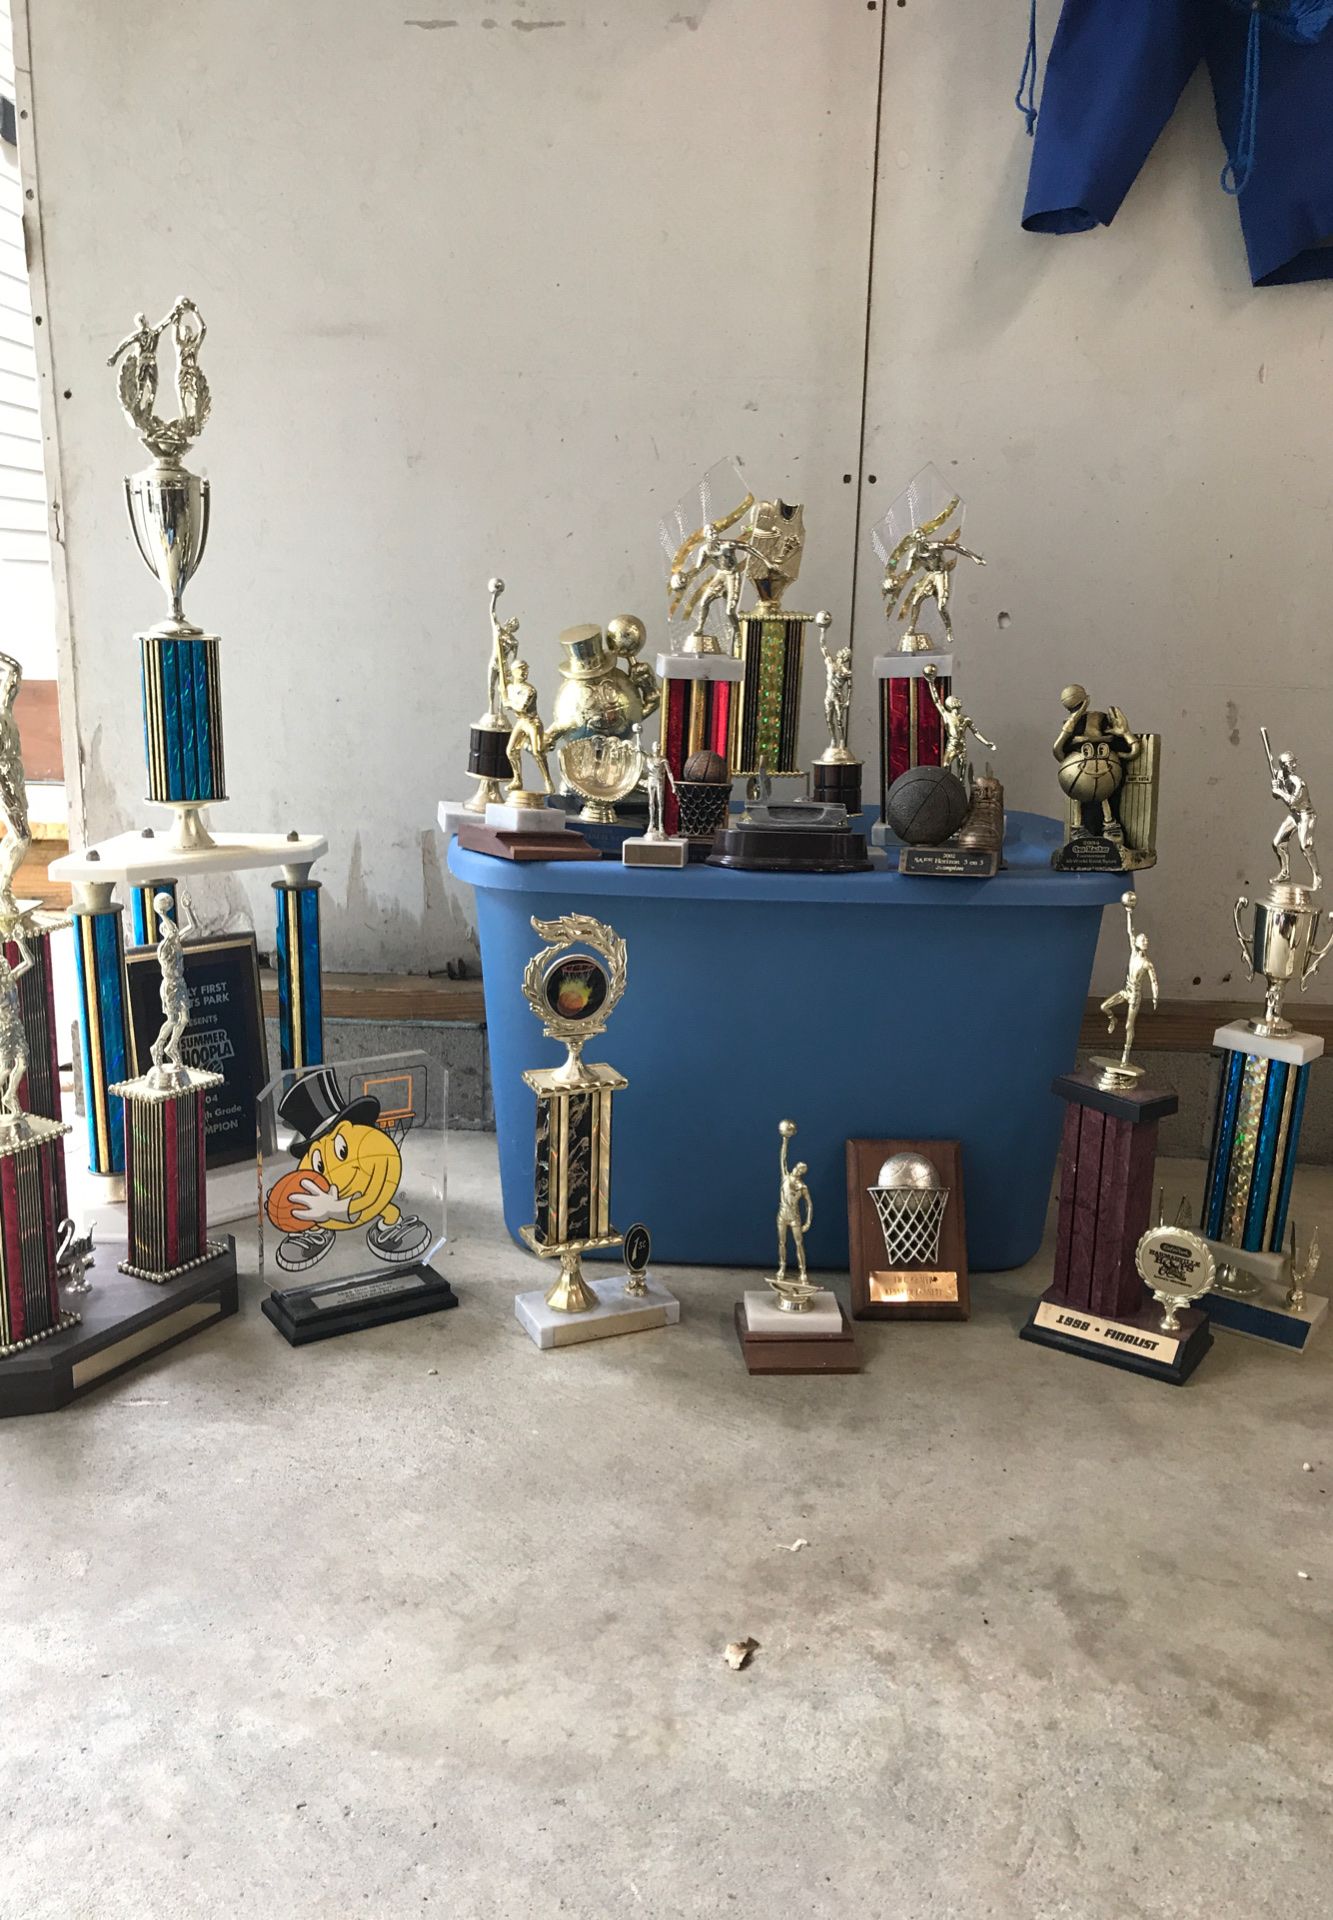 Free trophies any takers before landfill